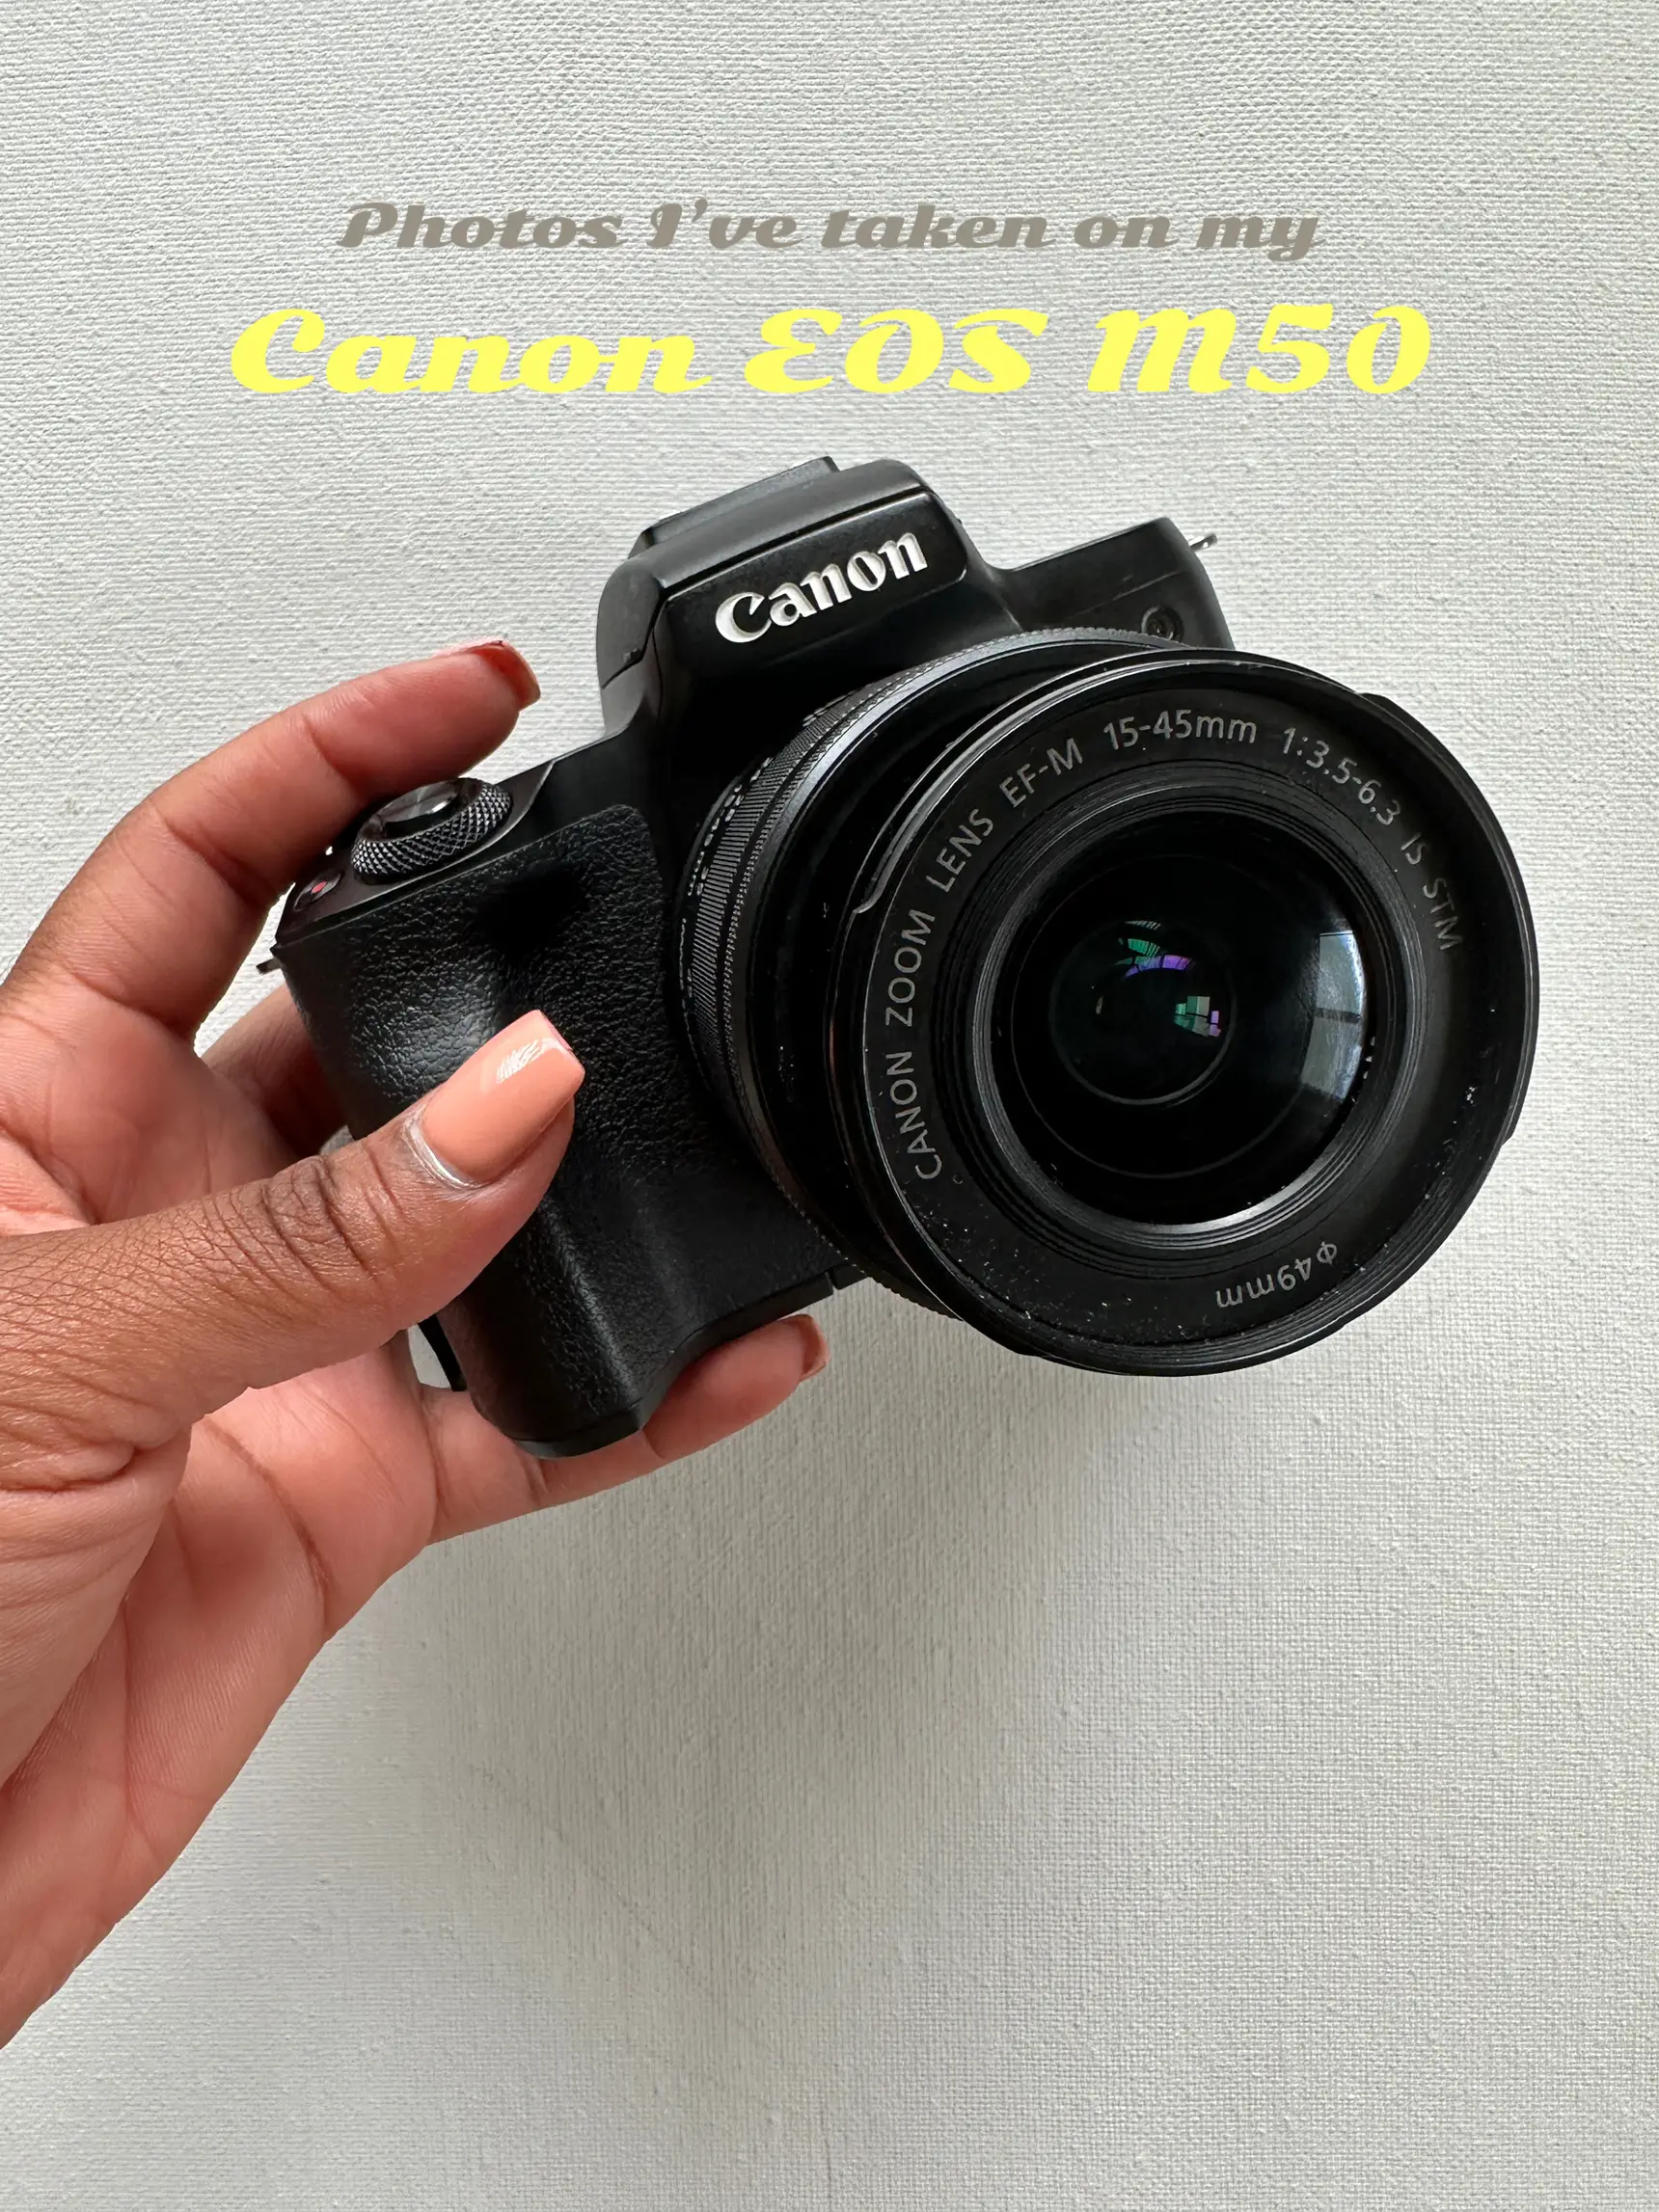 Discontinued items - EOS M50 Mark II (EF-M15-45mm f/3.5-6.3 IS STM) - Canon  HongKong